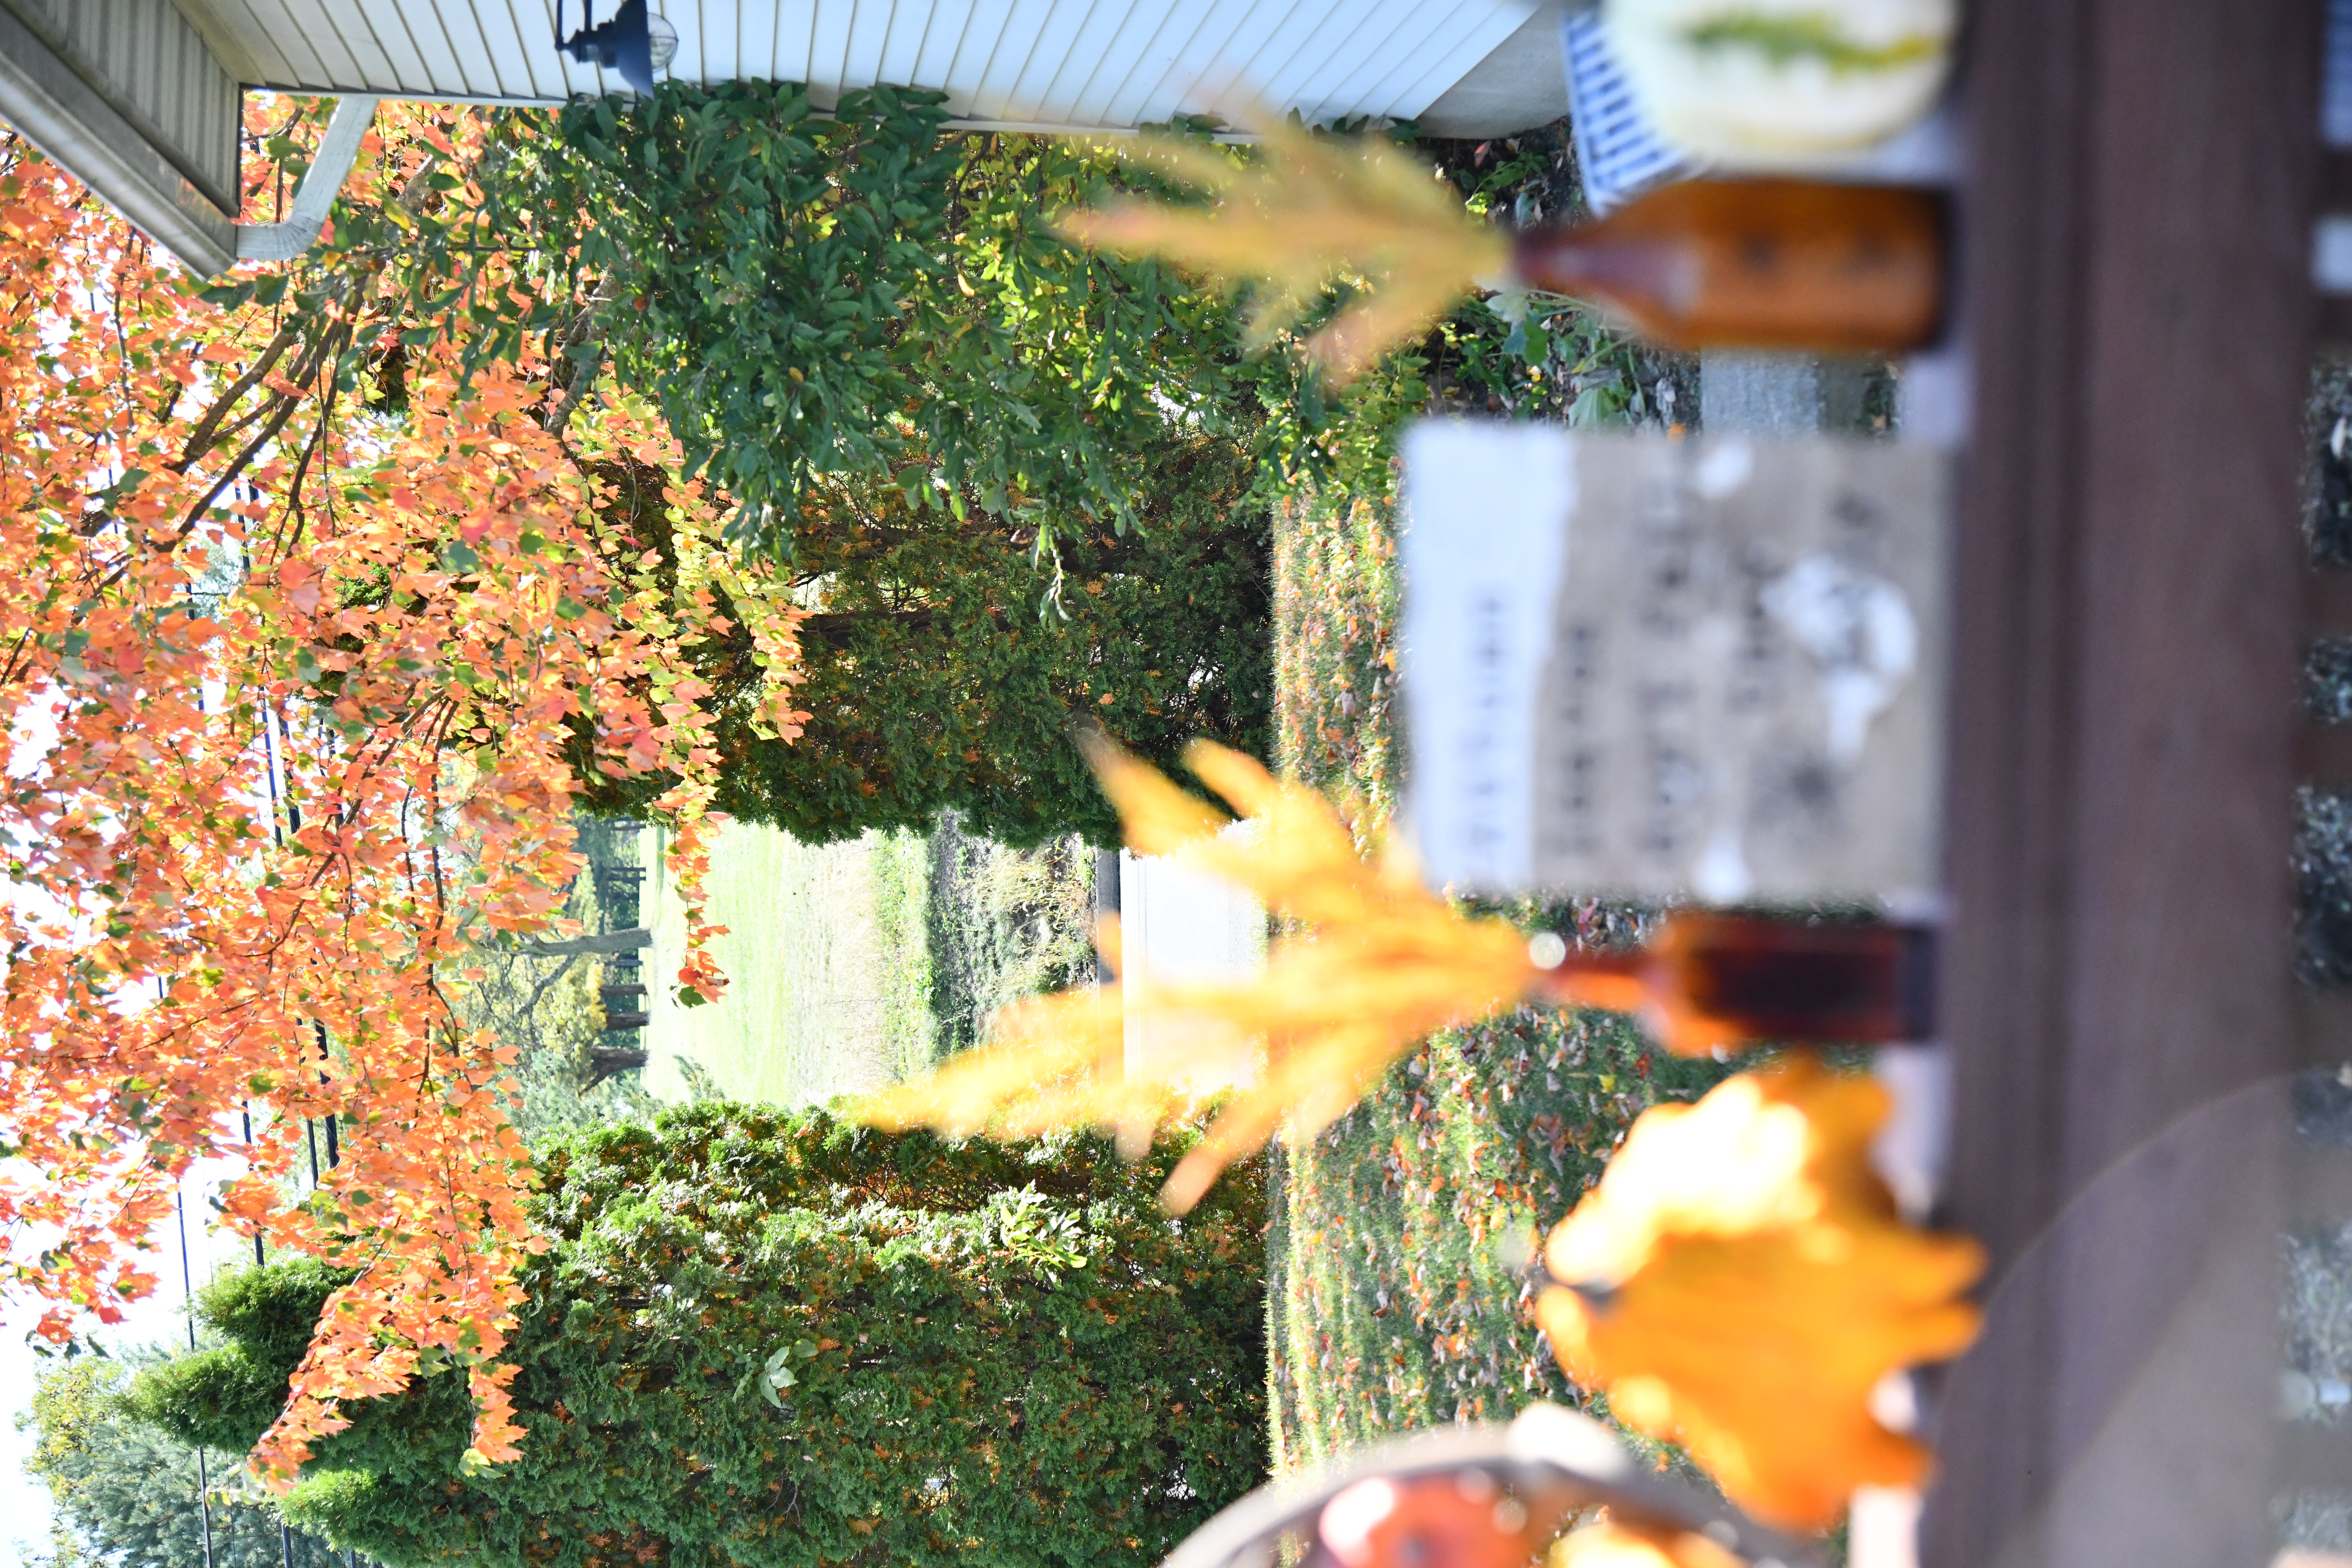 Fall leaves and tree blurred out sign and amber bottles